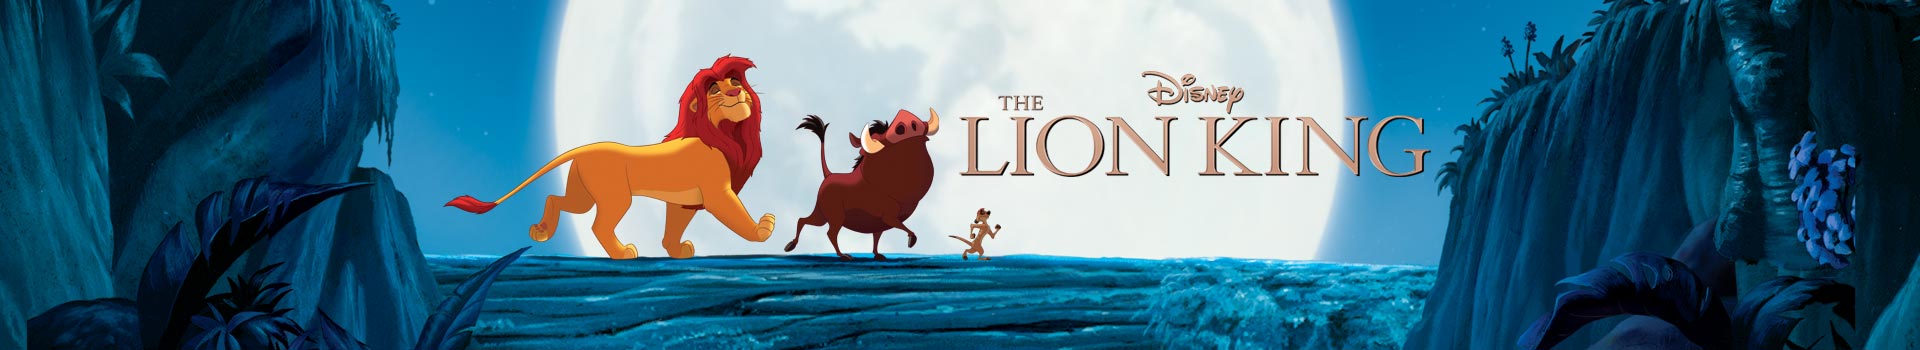 The Lion King - Official Merchandise